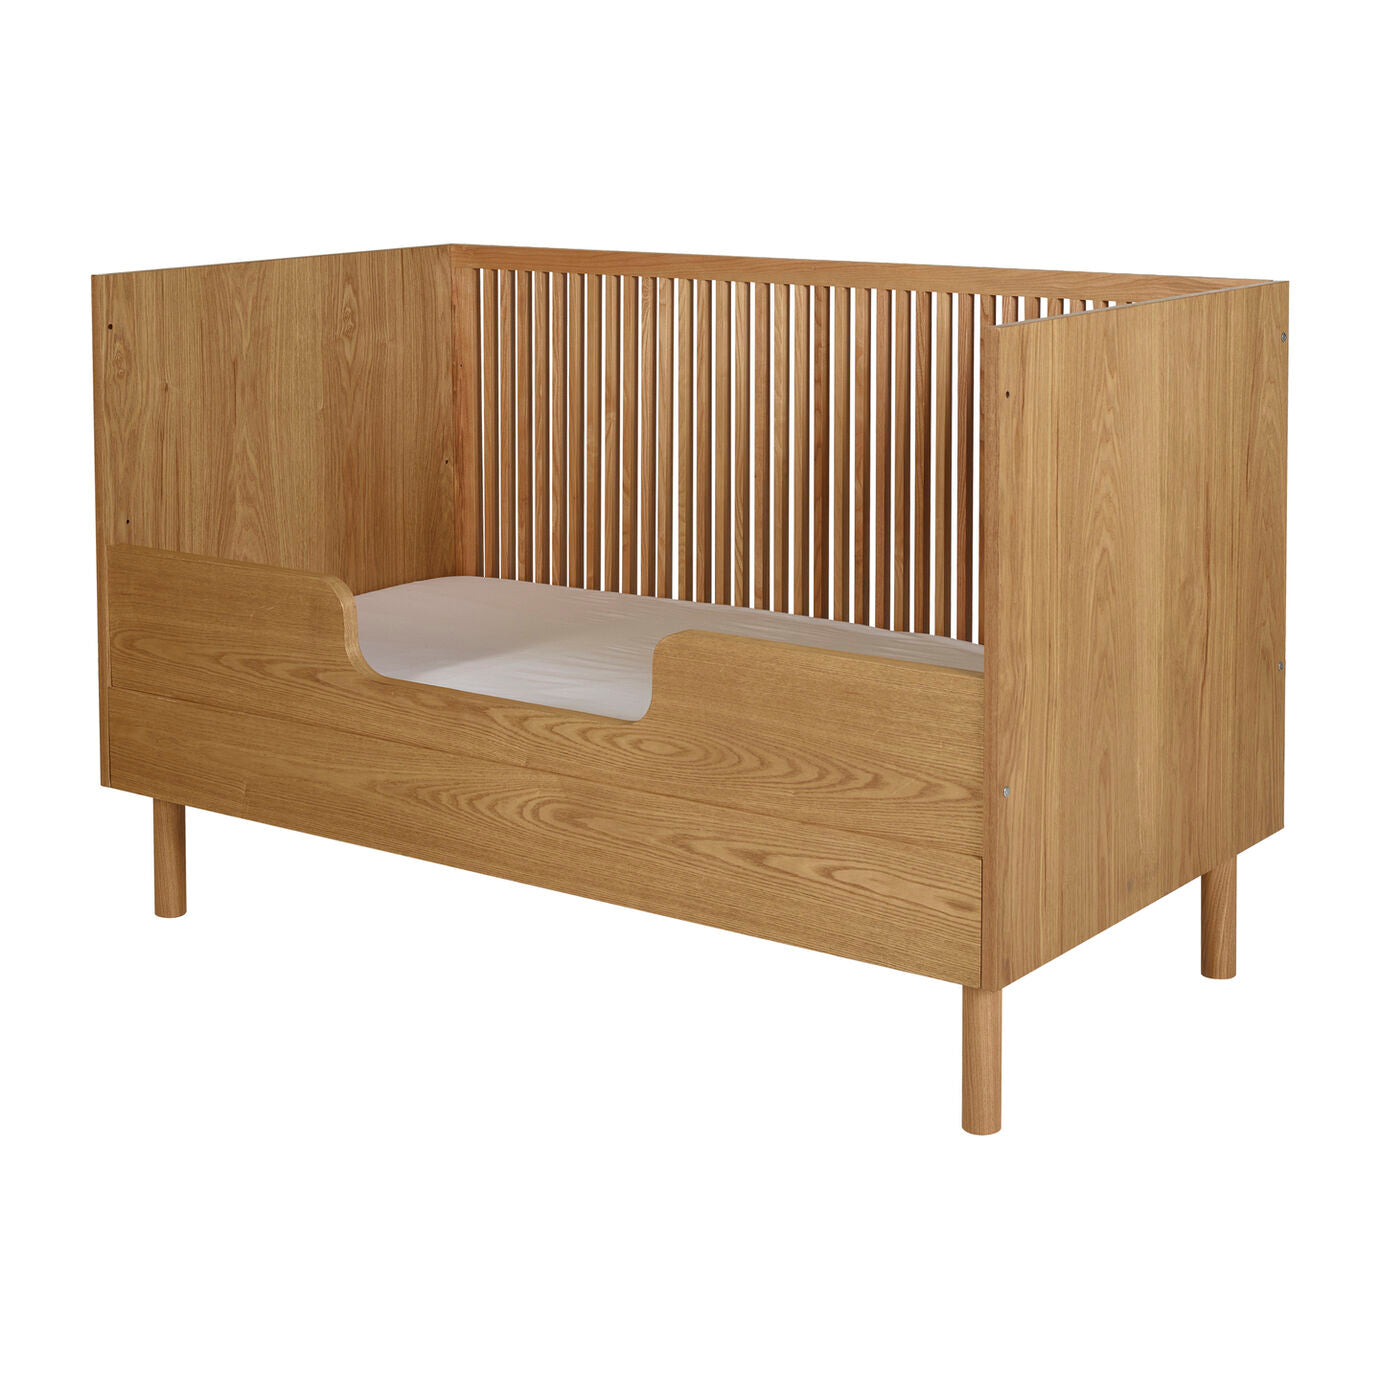 Deer Industries Baby Furniture, Quax Series, High quality wooden baby furniture made in Singapore